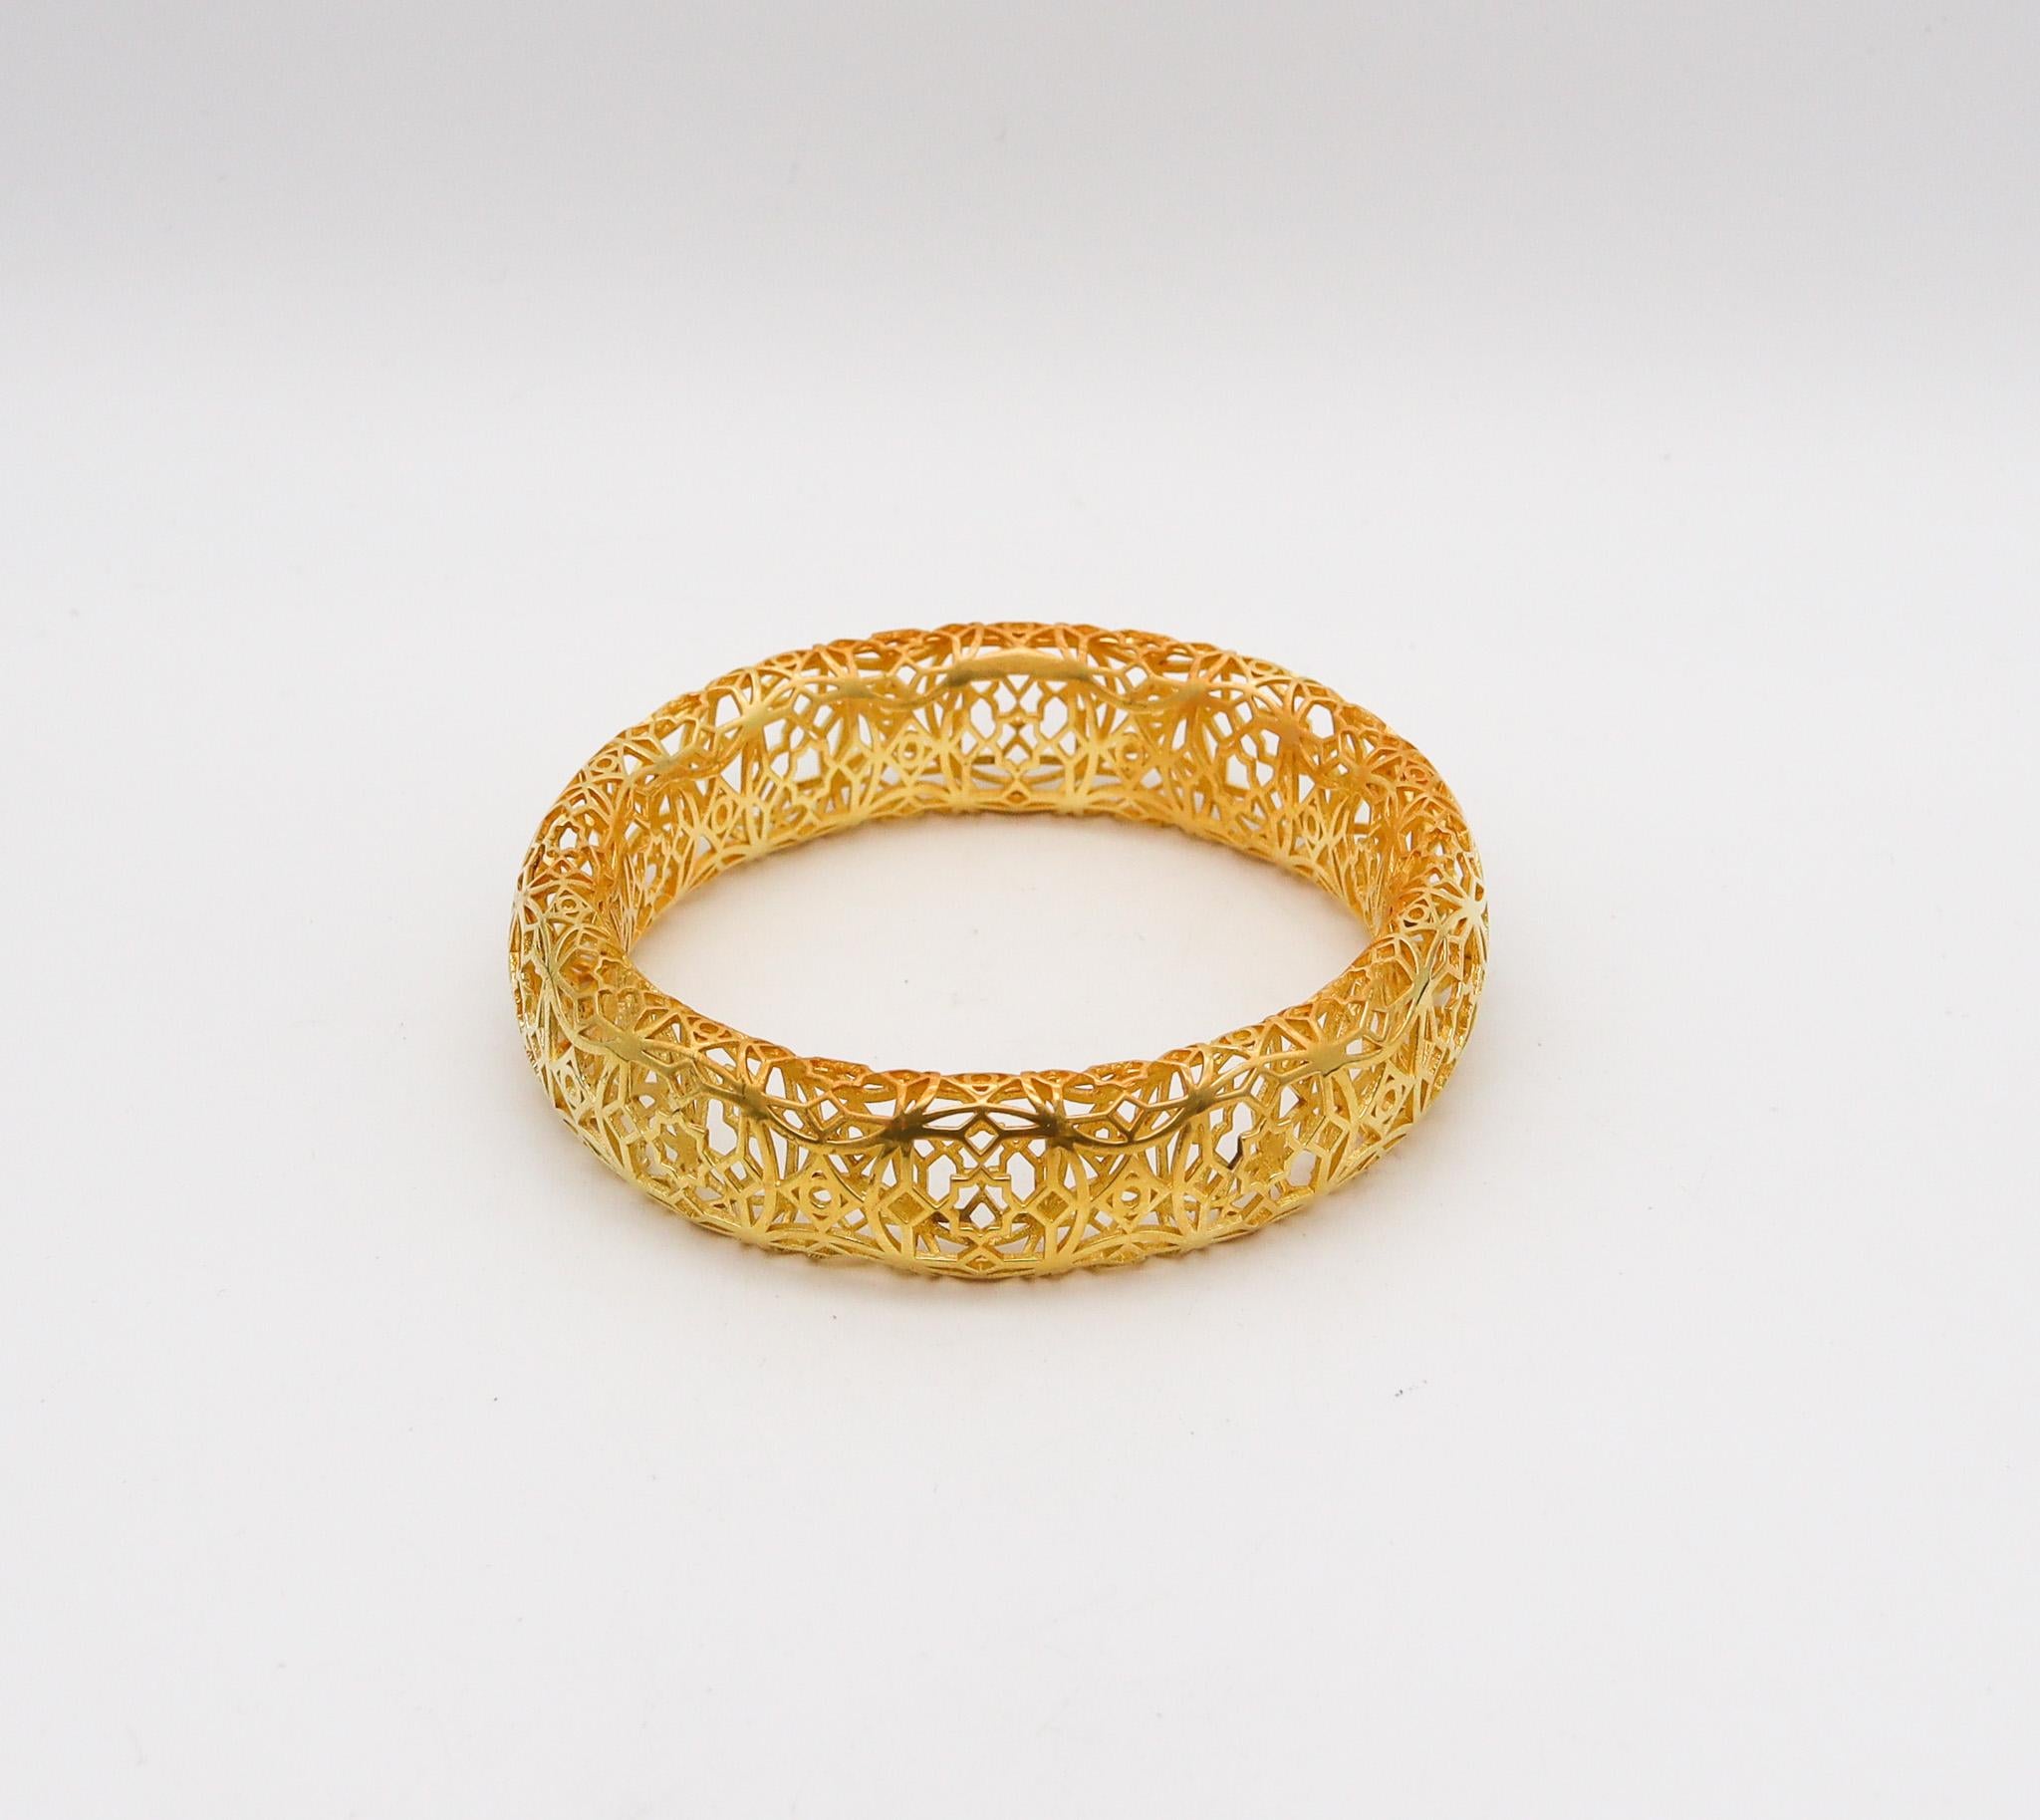 Tiffany & Co. Paloma Picasso Marrakesh Bangle Bracelet 18Kt Vermeil On Sterling In Good Condition For Sale In Miami, FL